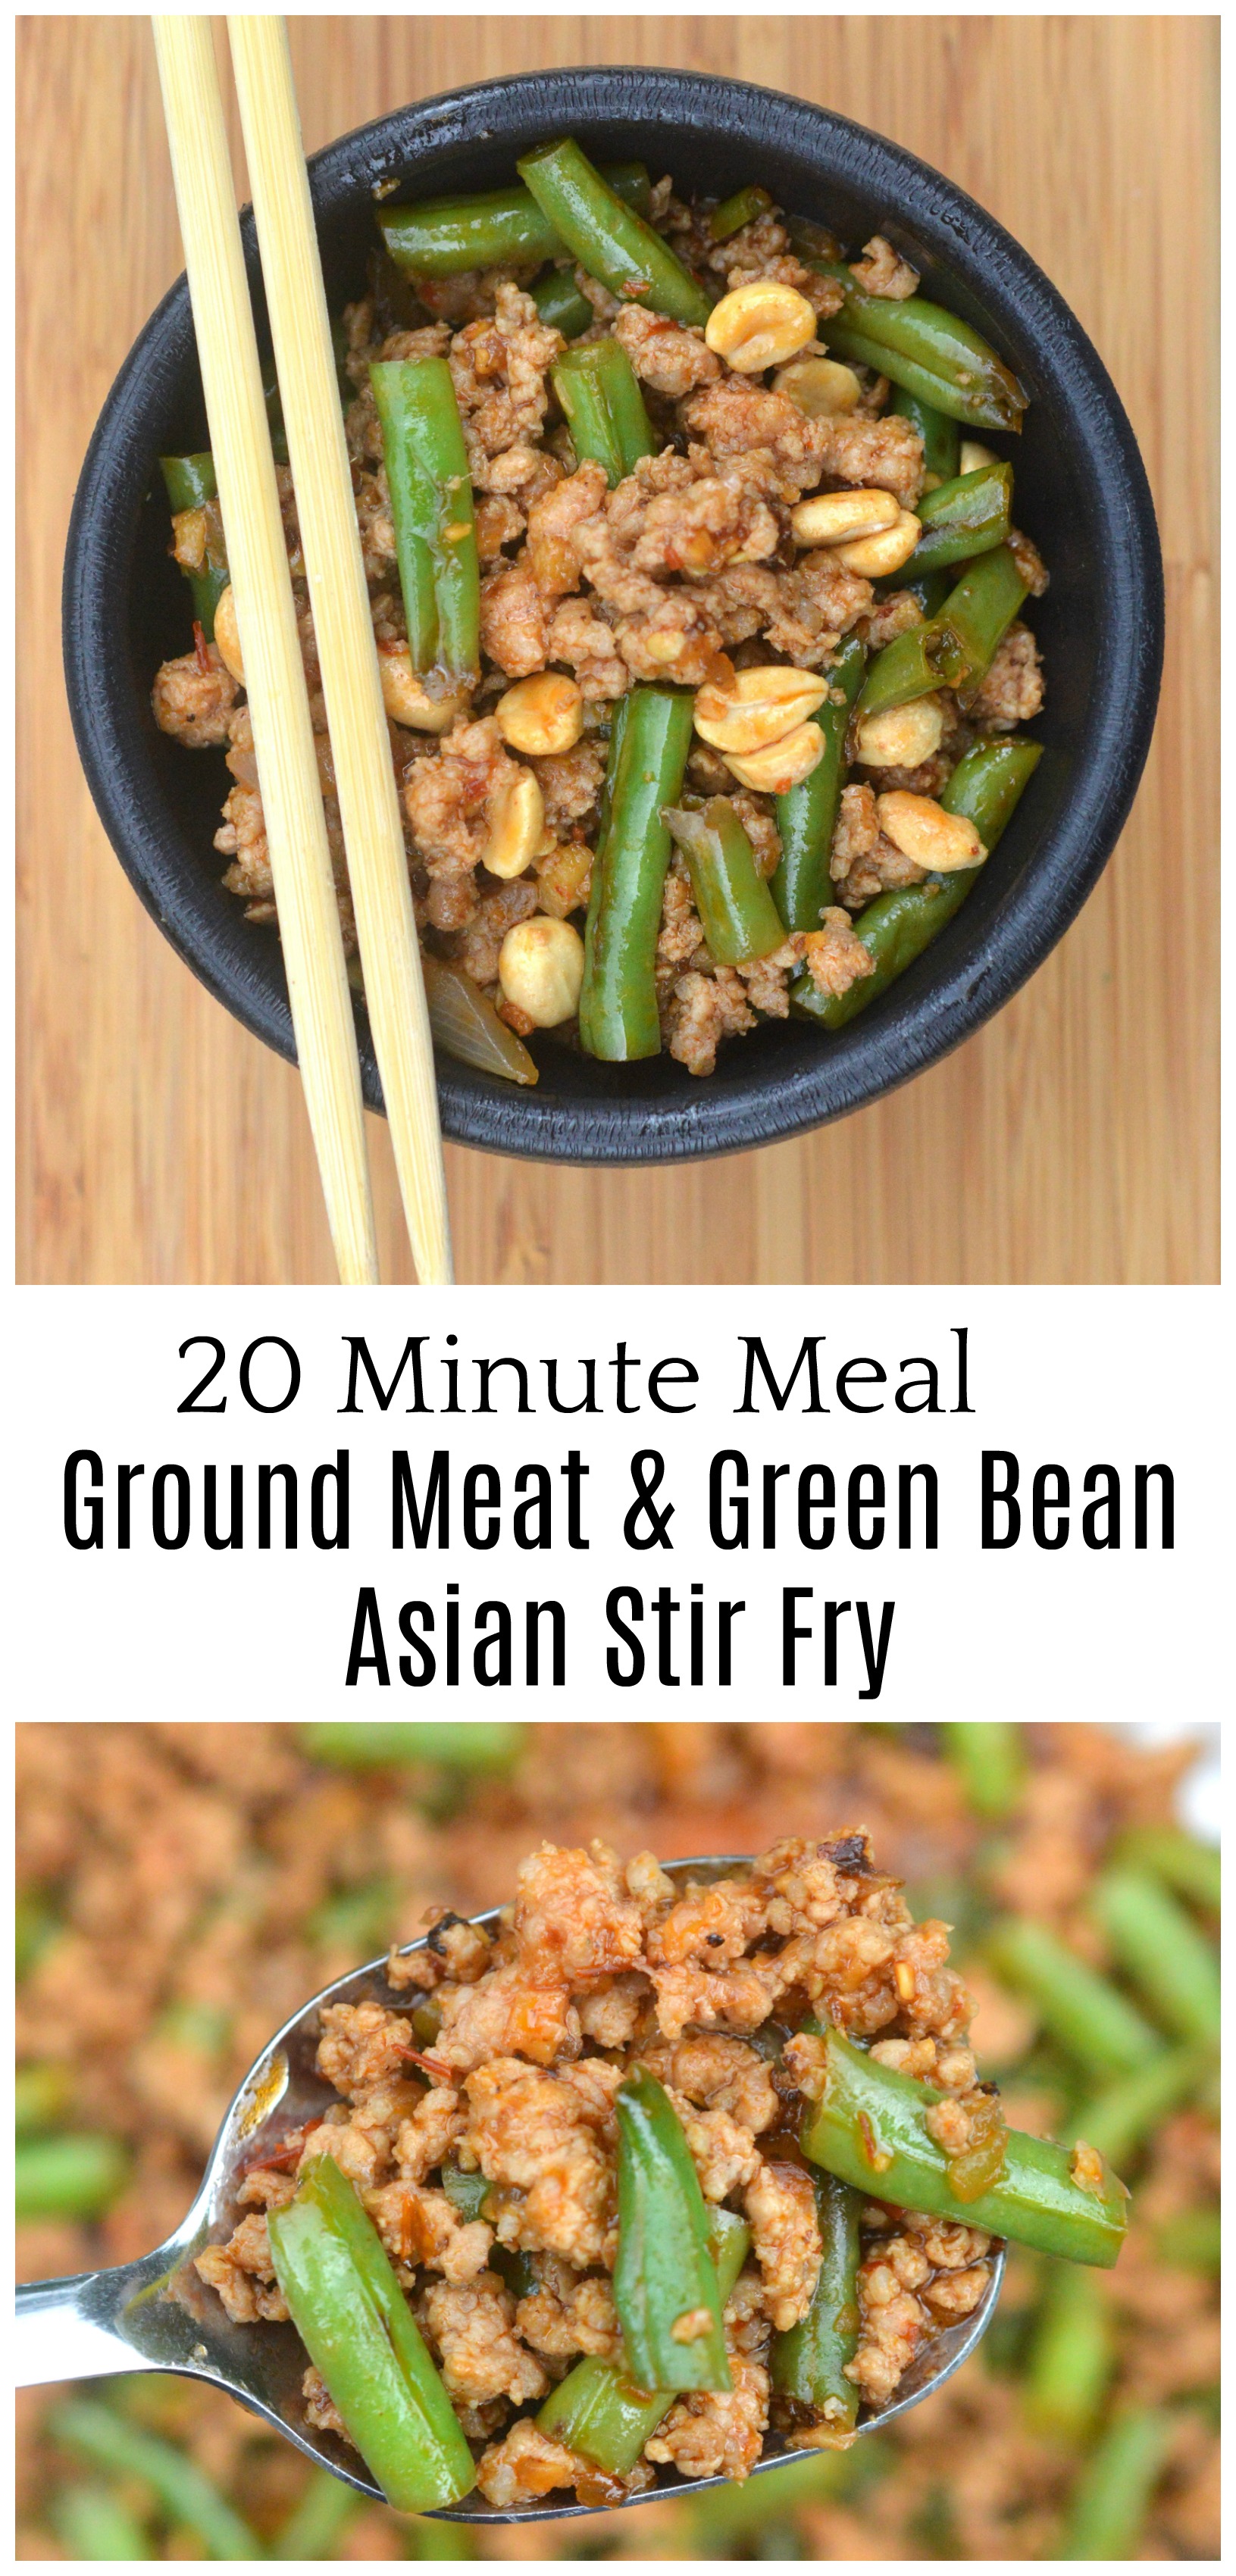 20 Minute Meal Ground Meat & Green Bean Asian Stir Fry